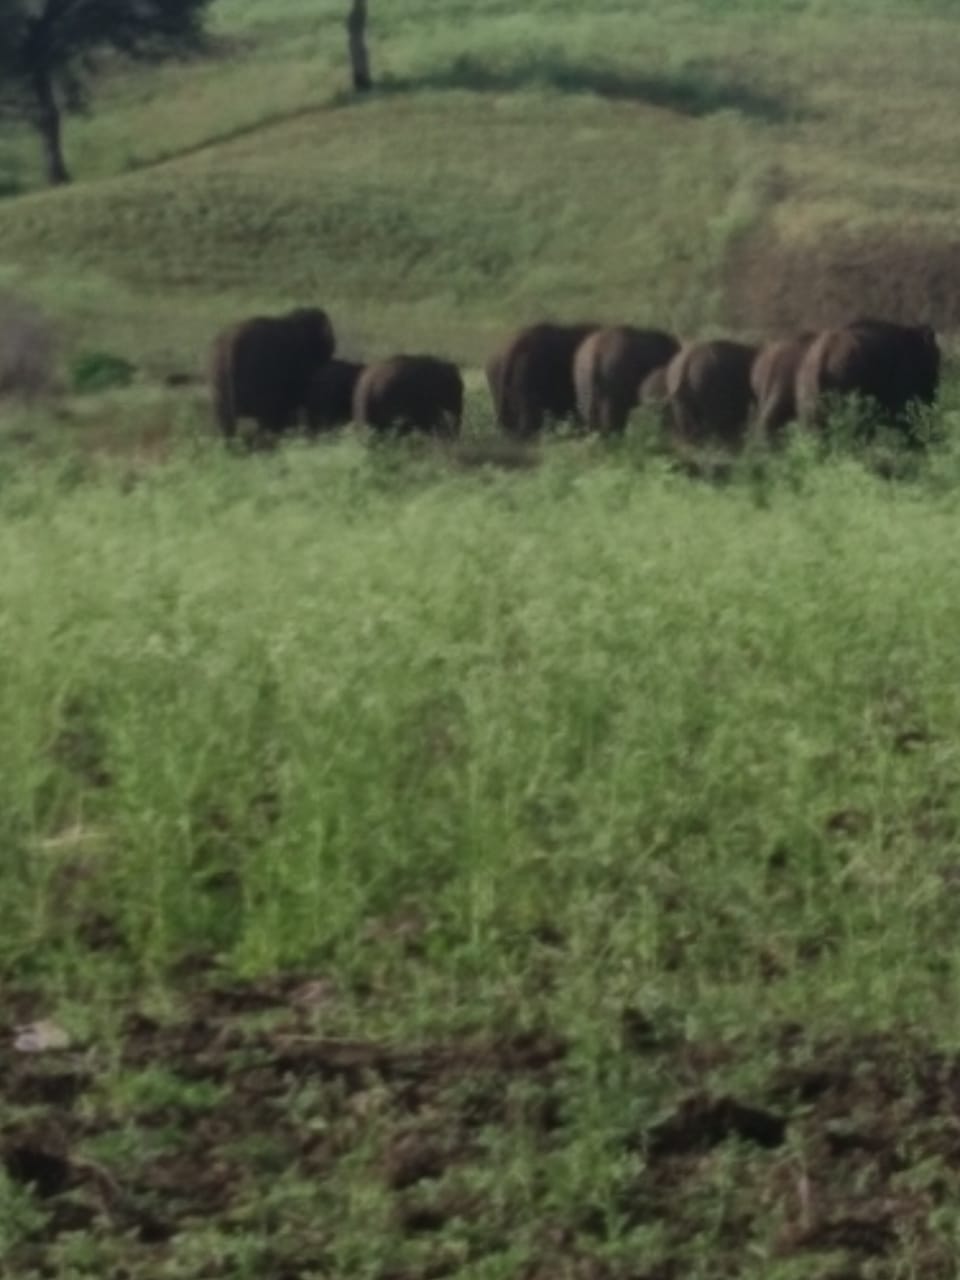 Elephants rushed to village fields, crushed and killed three villagers